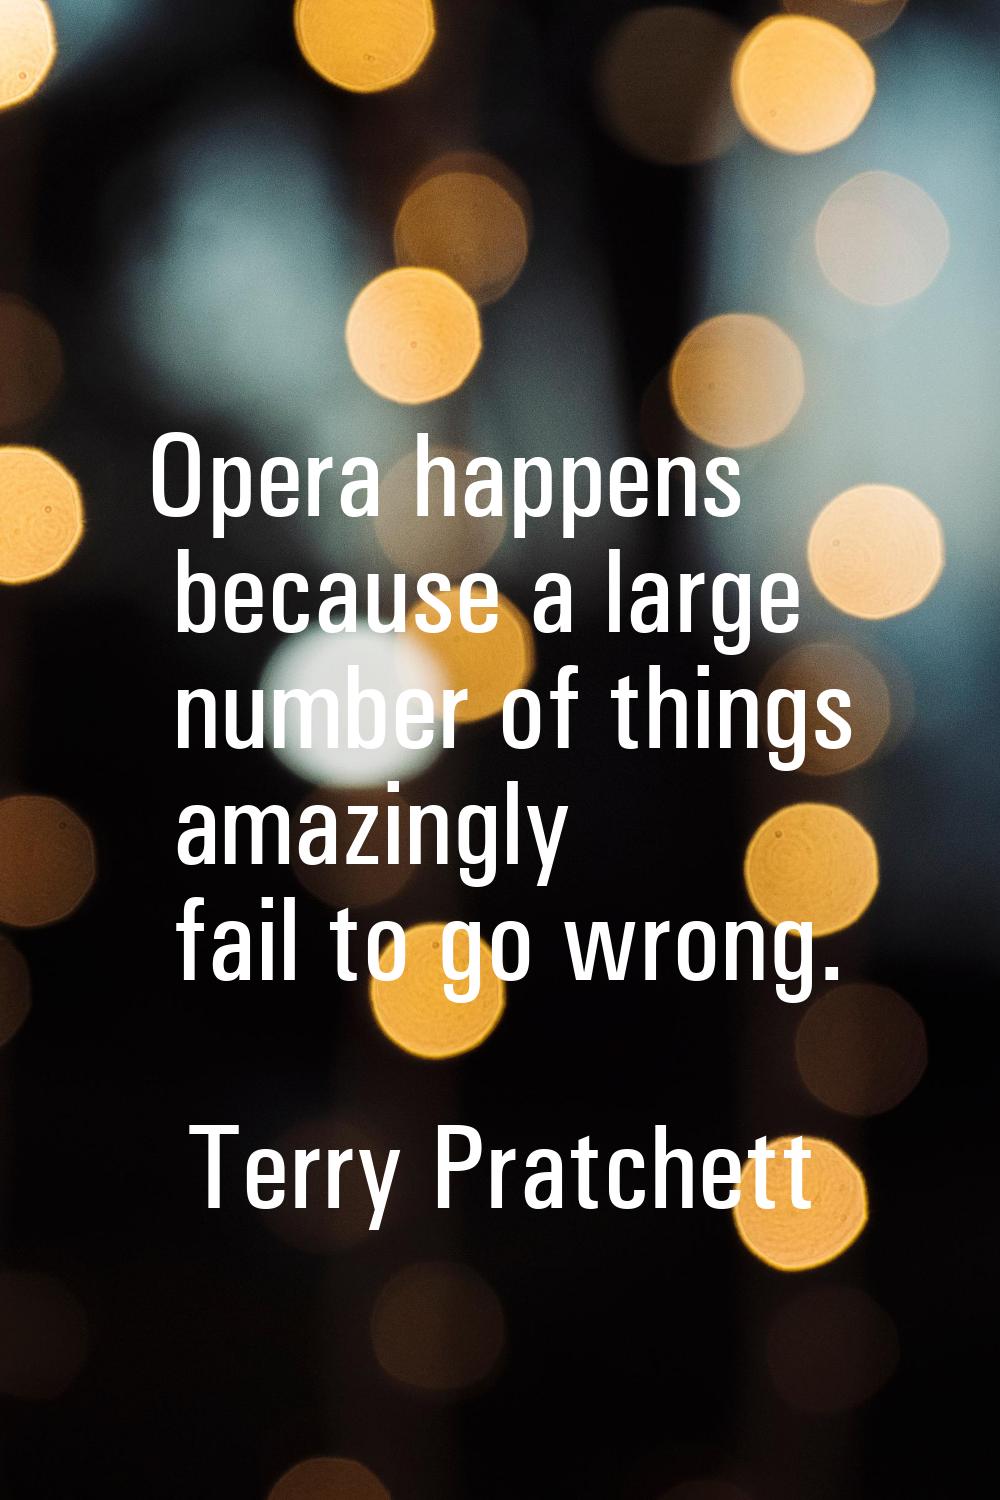 Opera happens because a large number of things amazingly fail to go wrong.